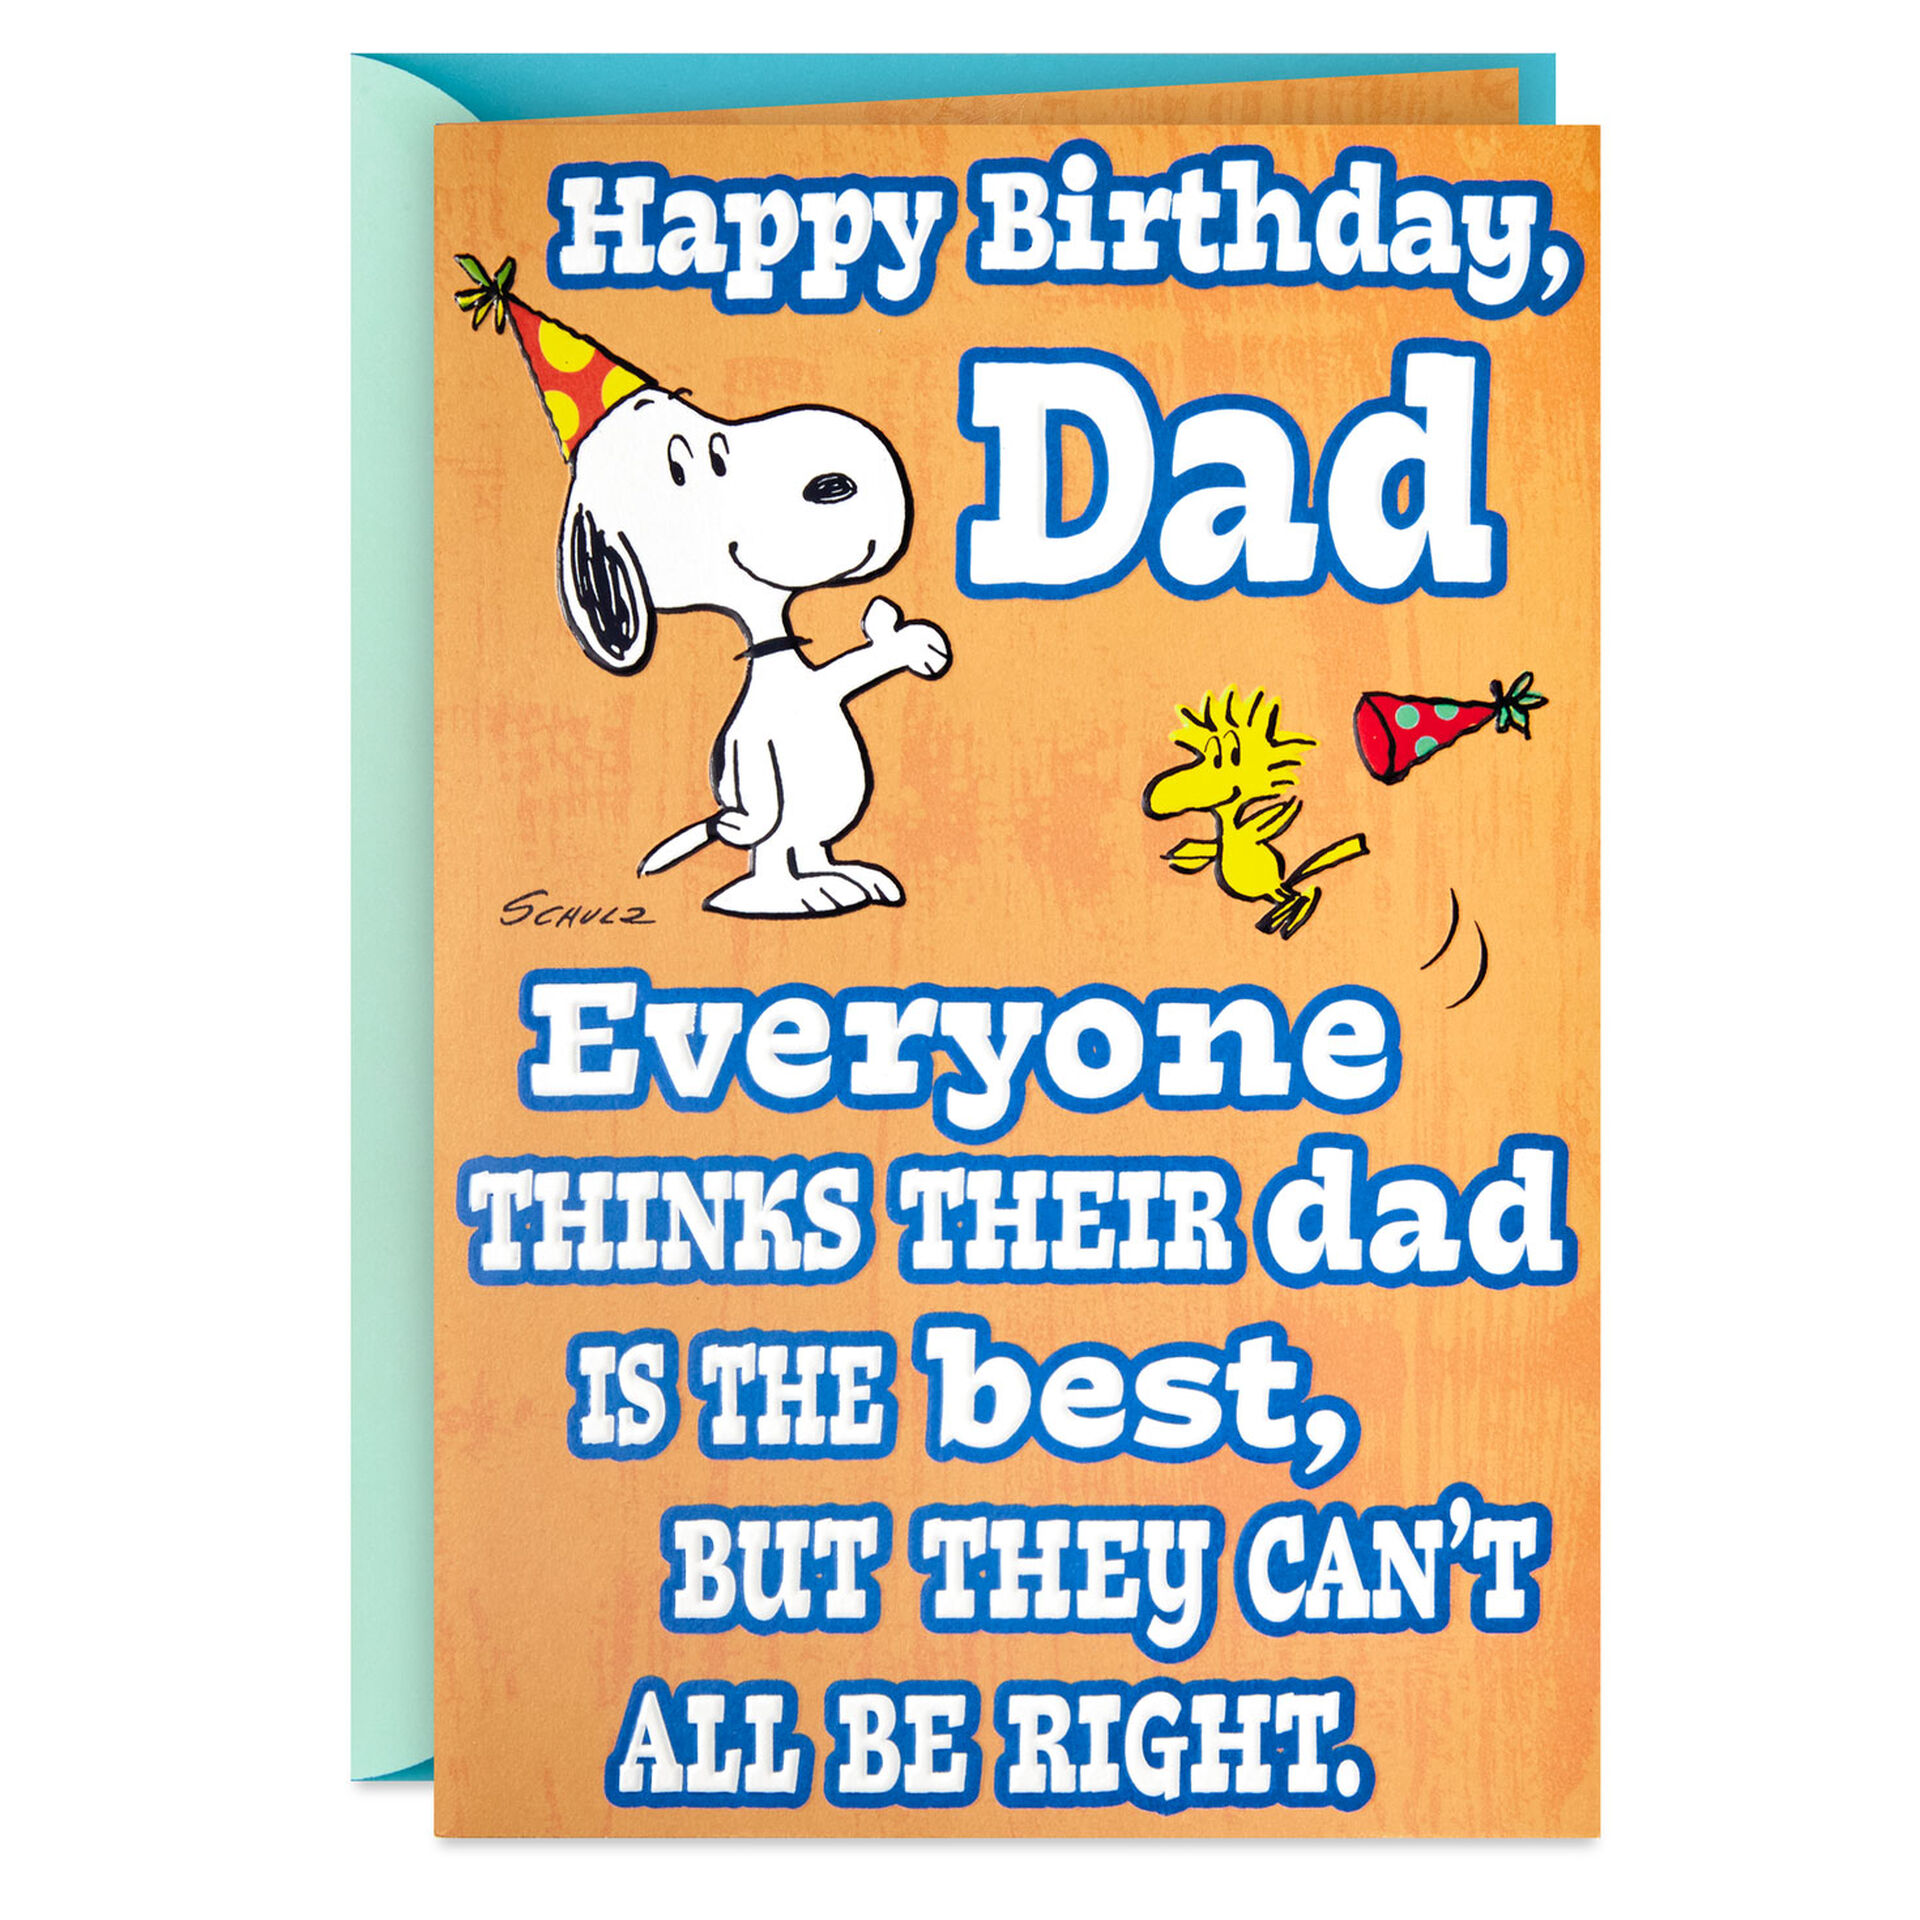 Peanuts Snoopy And Woodstock Pop Up Birthday Card For Dad Greeting Cards Hallmark